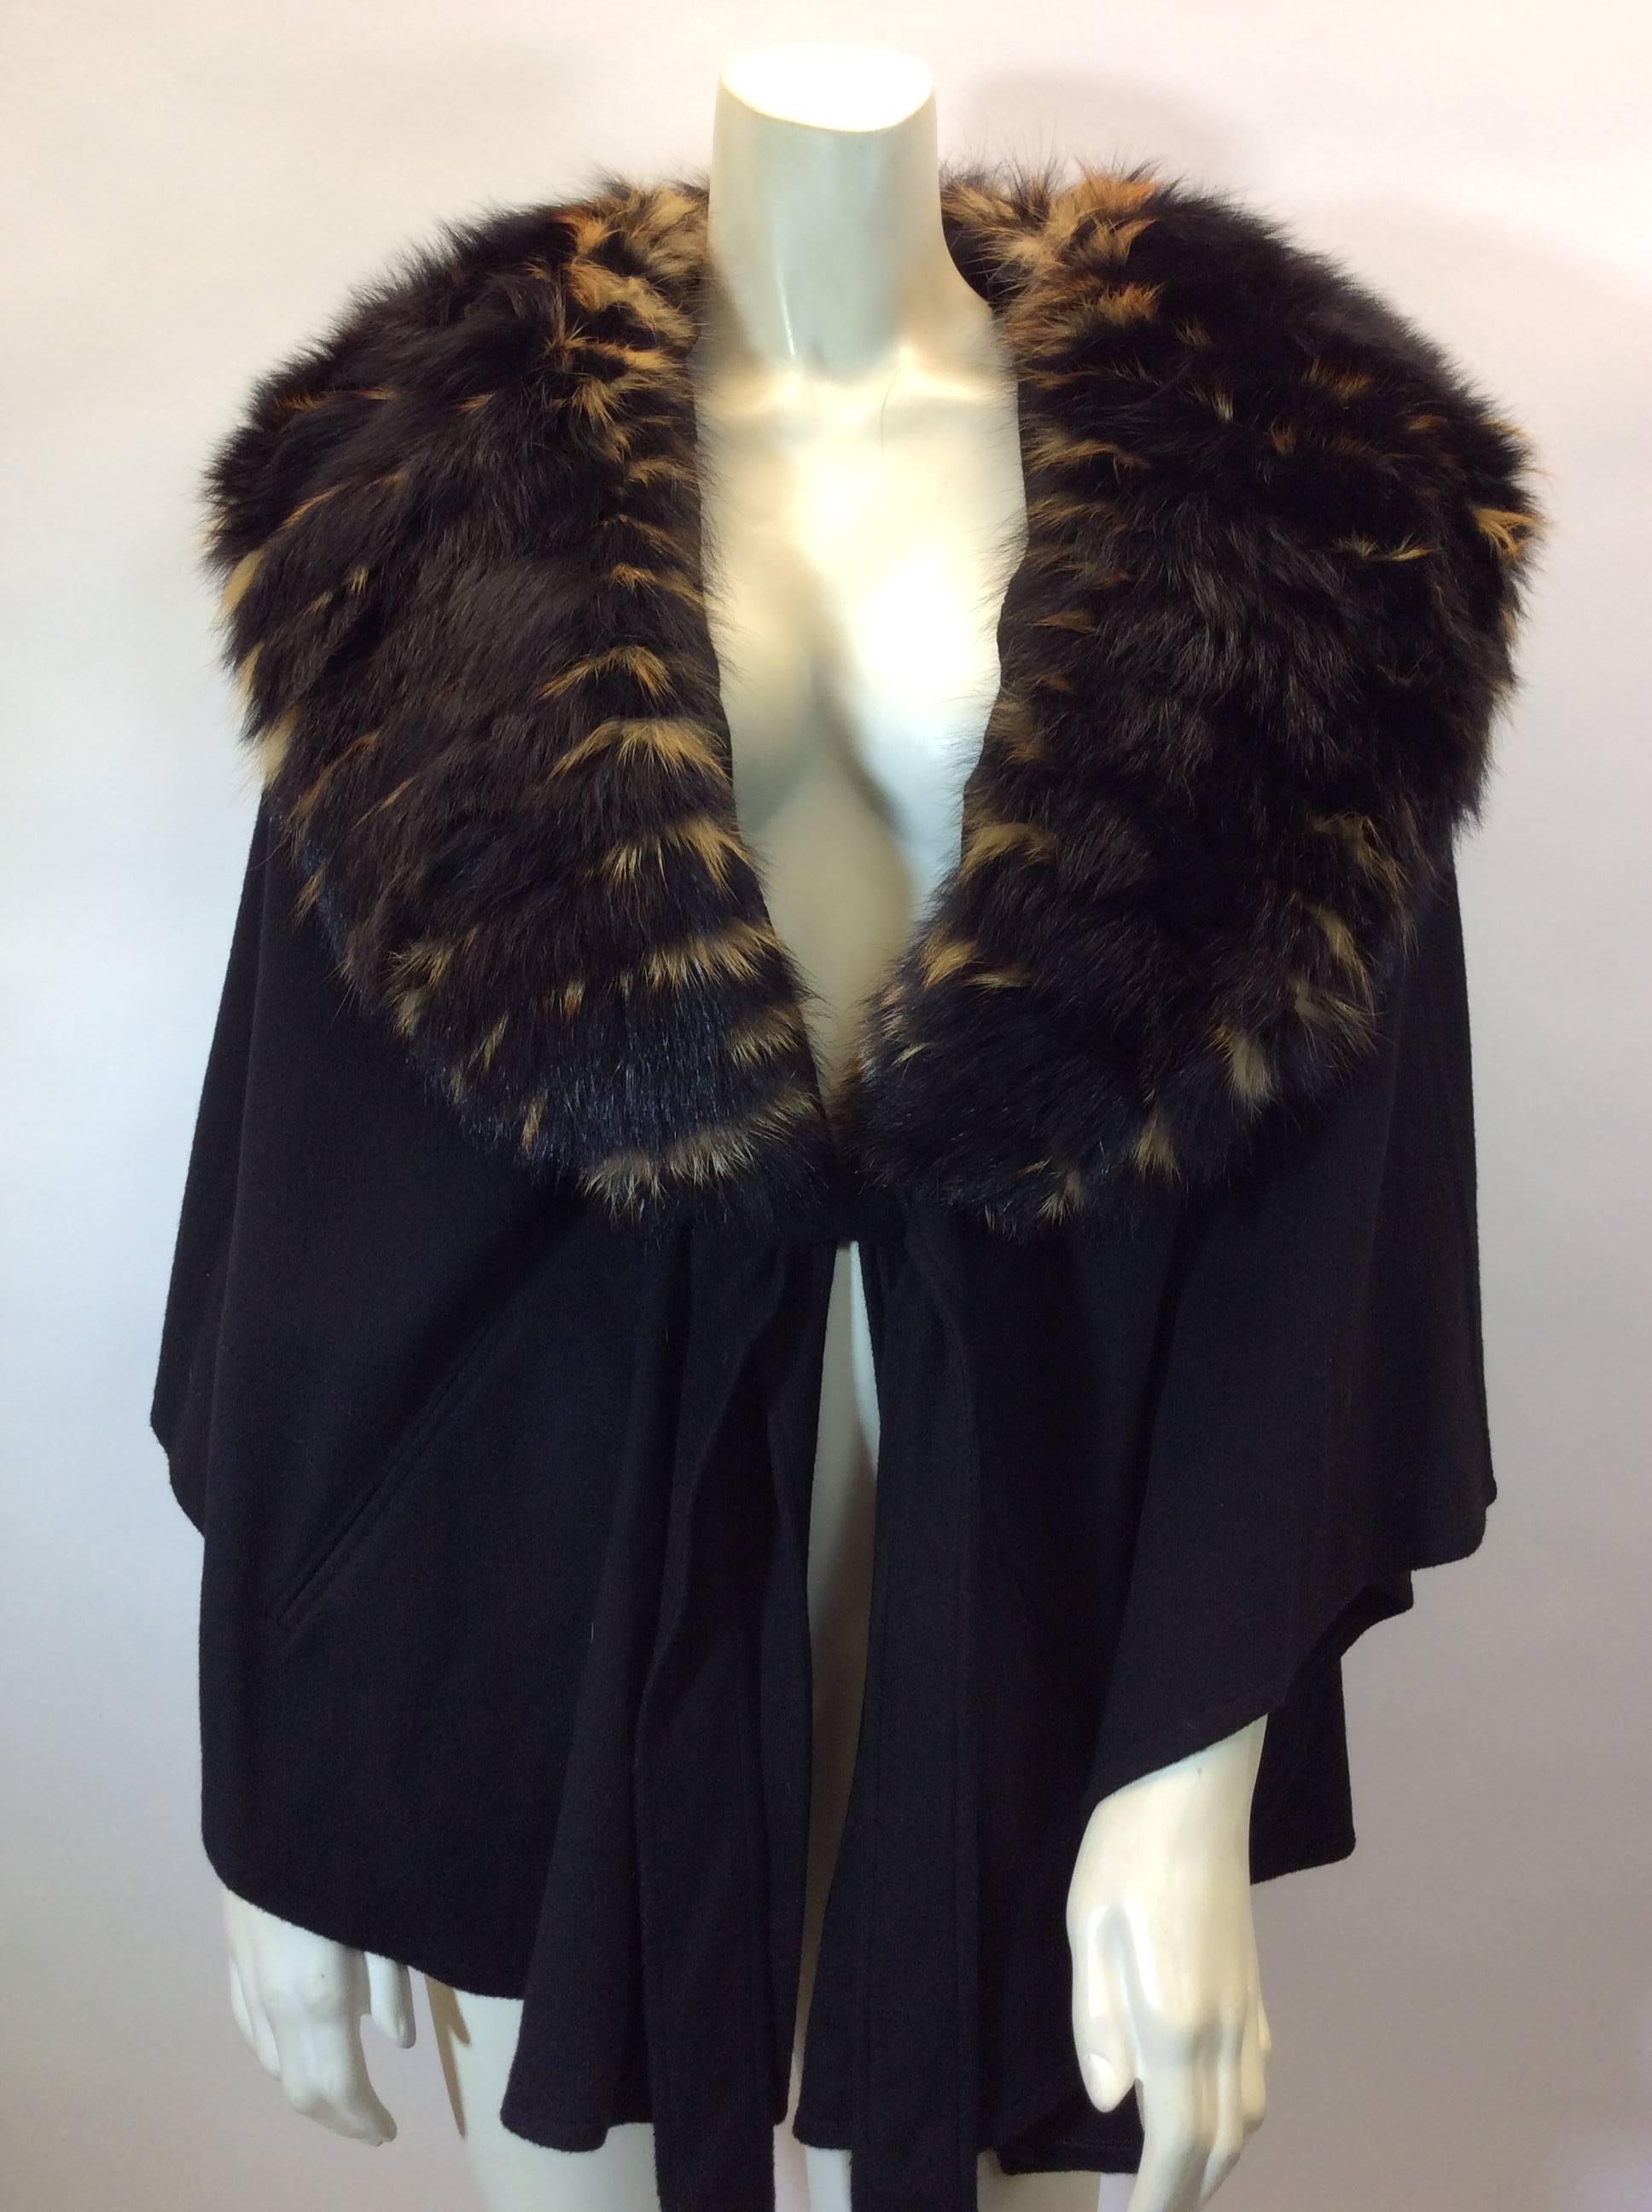 Loro Piana Cashmere Cape With Fox Collar
$4,000
26 inches long on the side
Tie belt closure
Made in Italy